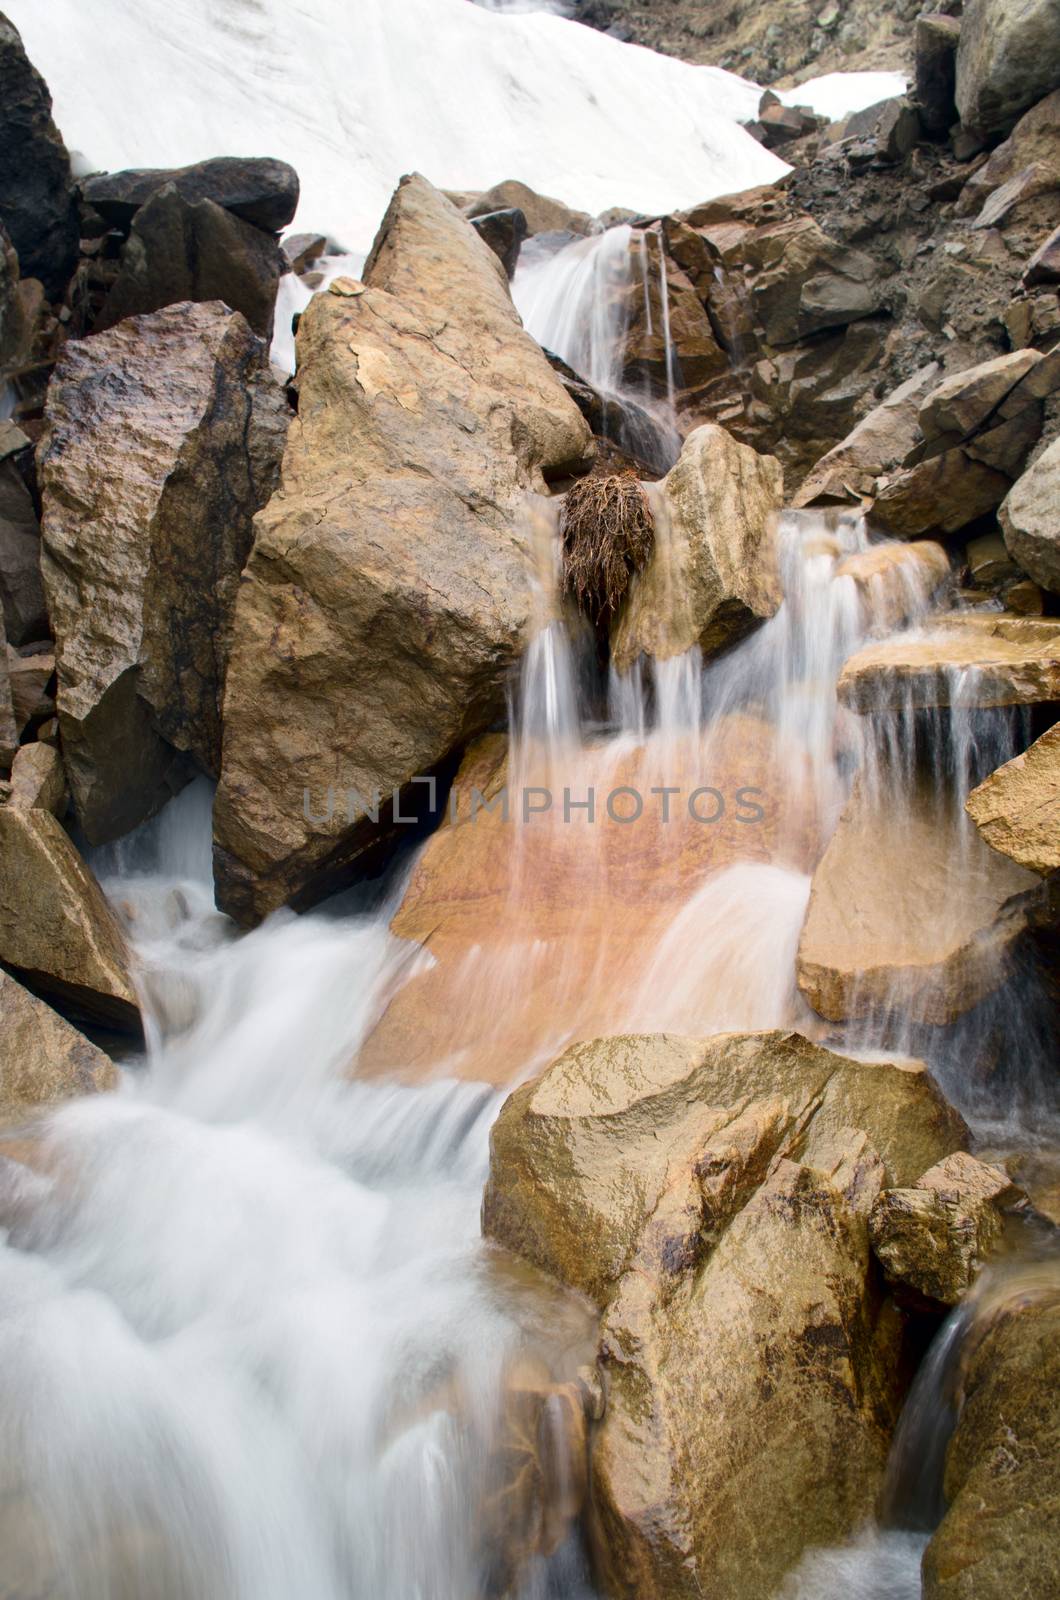 Stream among melting snow in a Carpathian Mountains